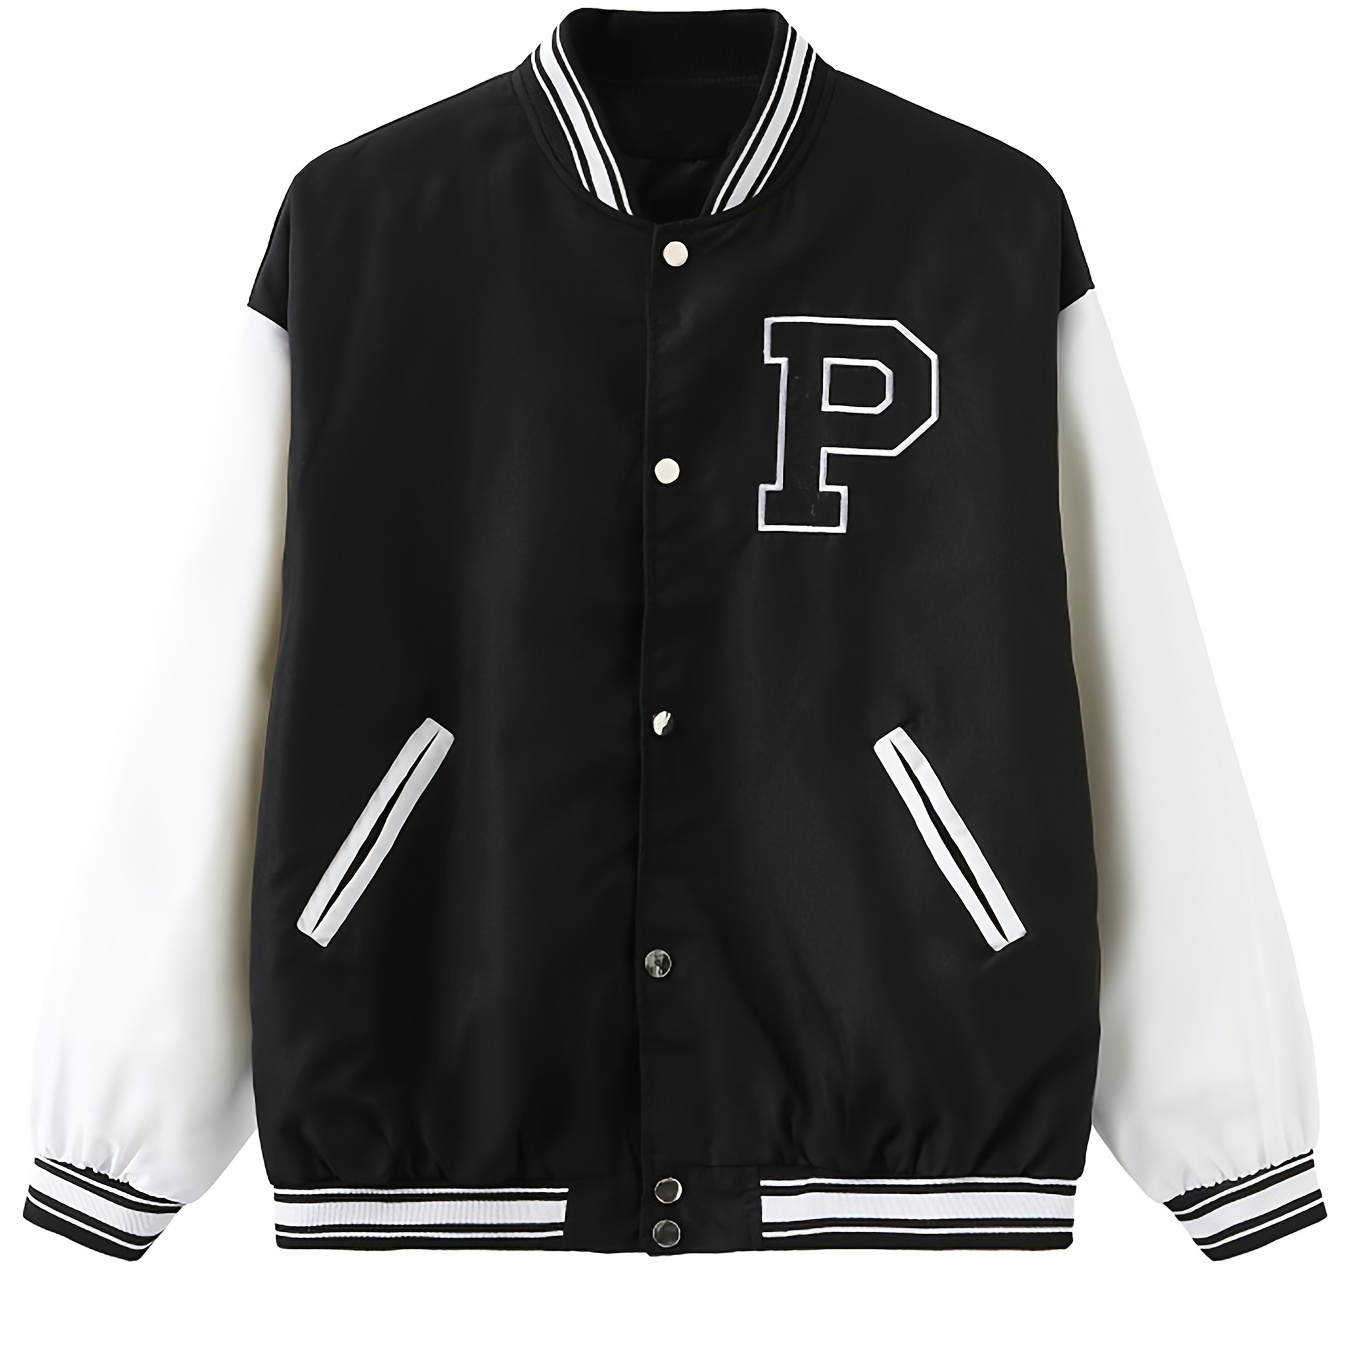 TheFound Women Casual Baseball Jacket Vintage Letter Print Crop